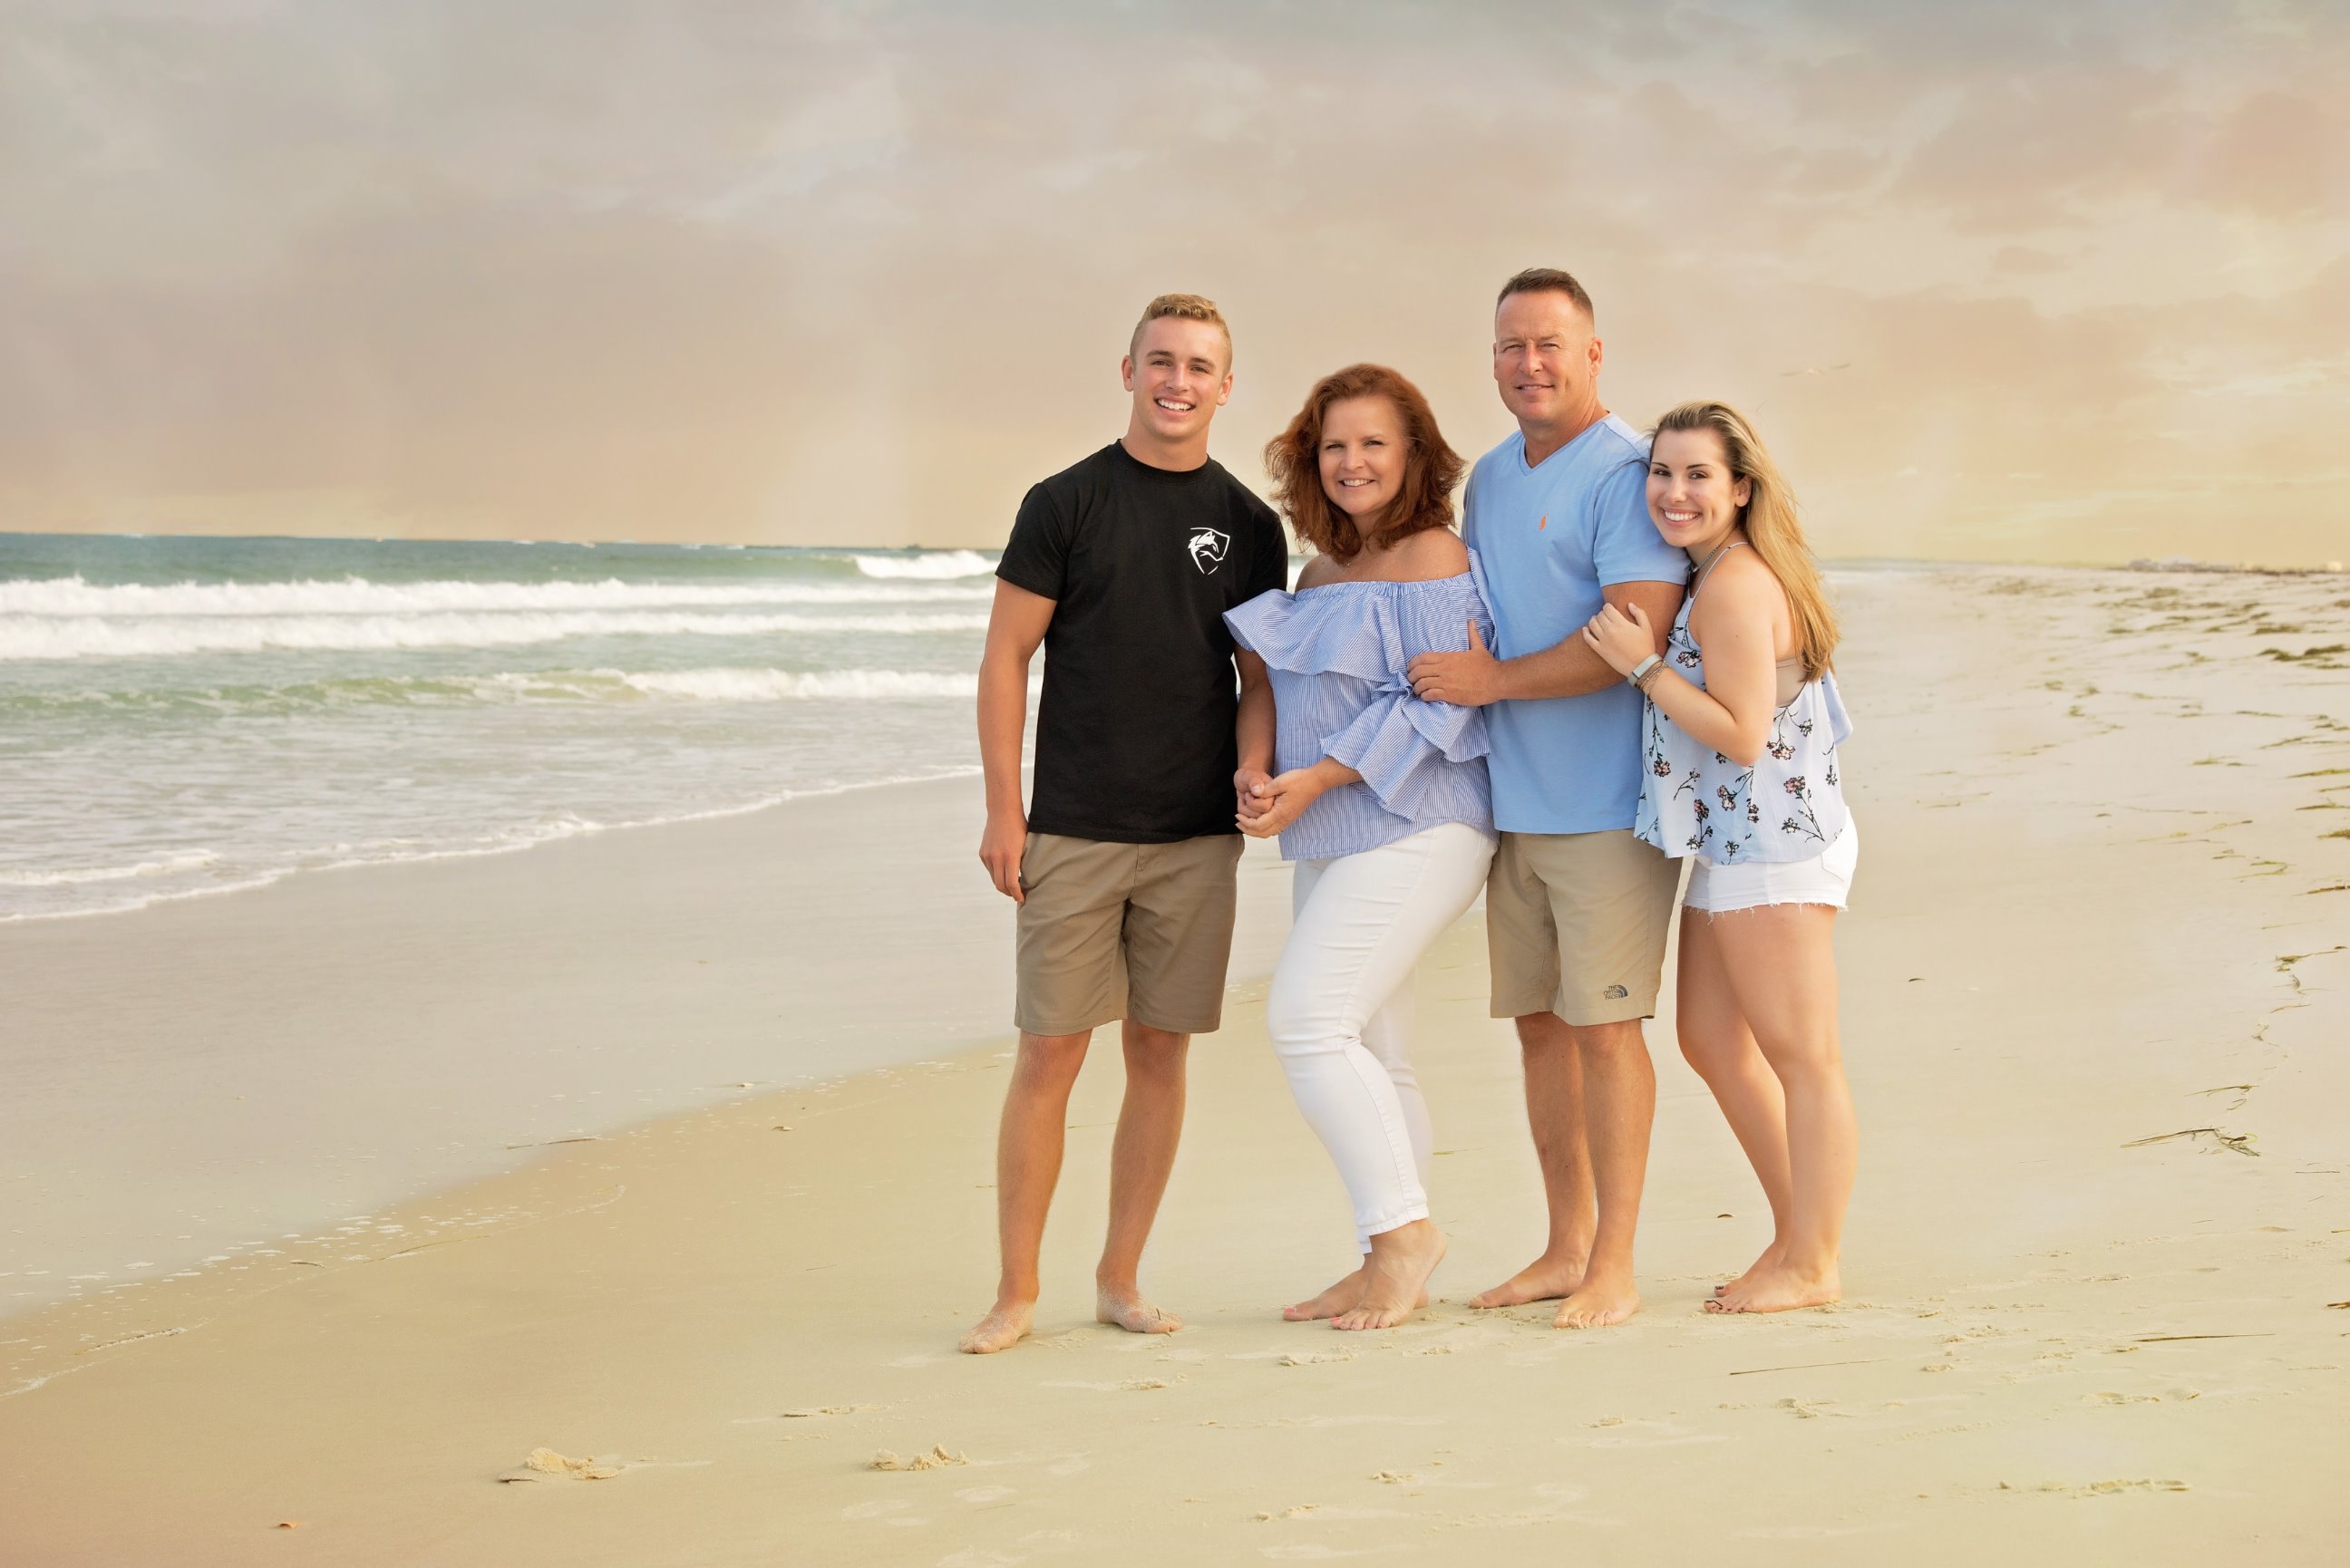 Family Beach Portrait at the Jersey Shore - Diana P. Lang Photography